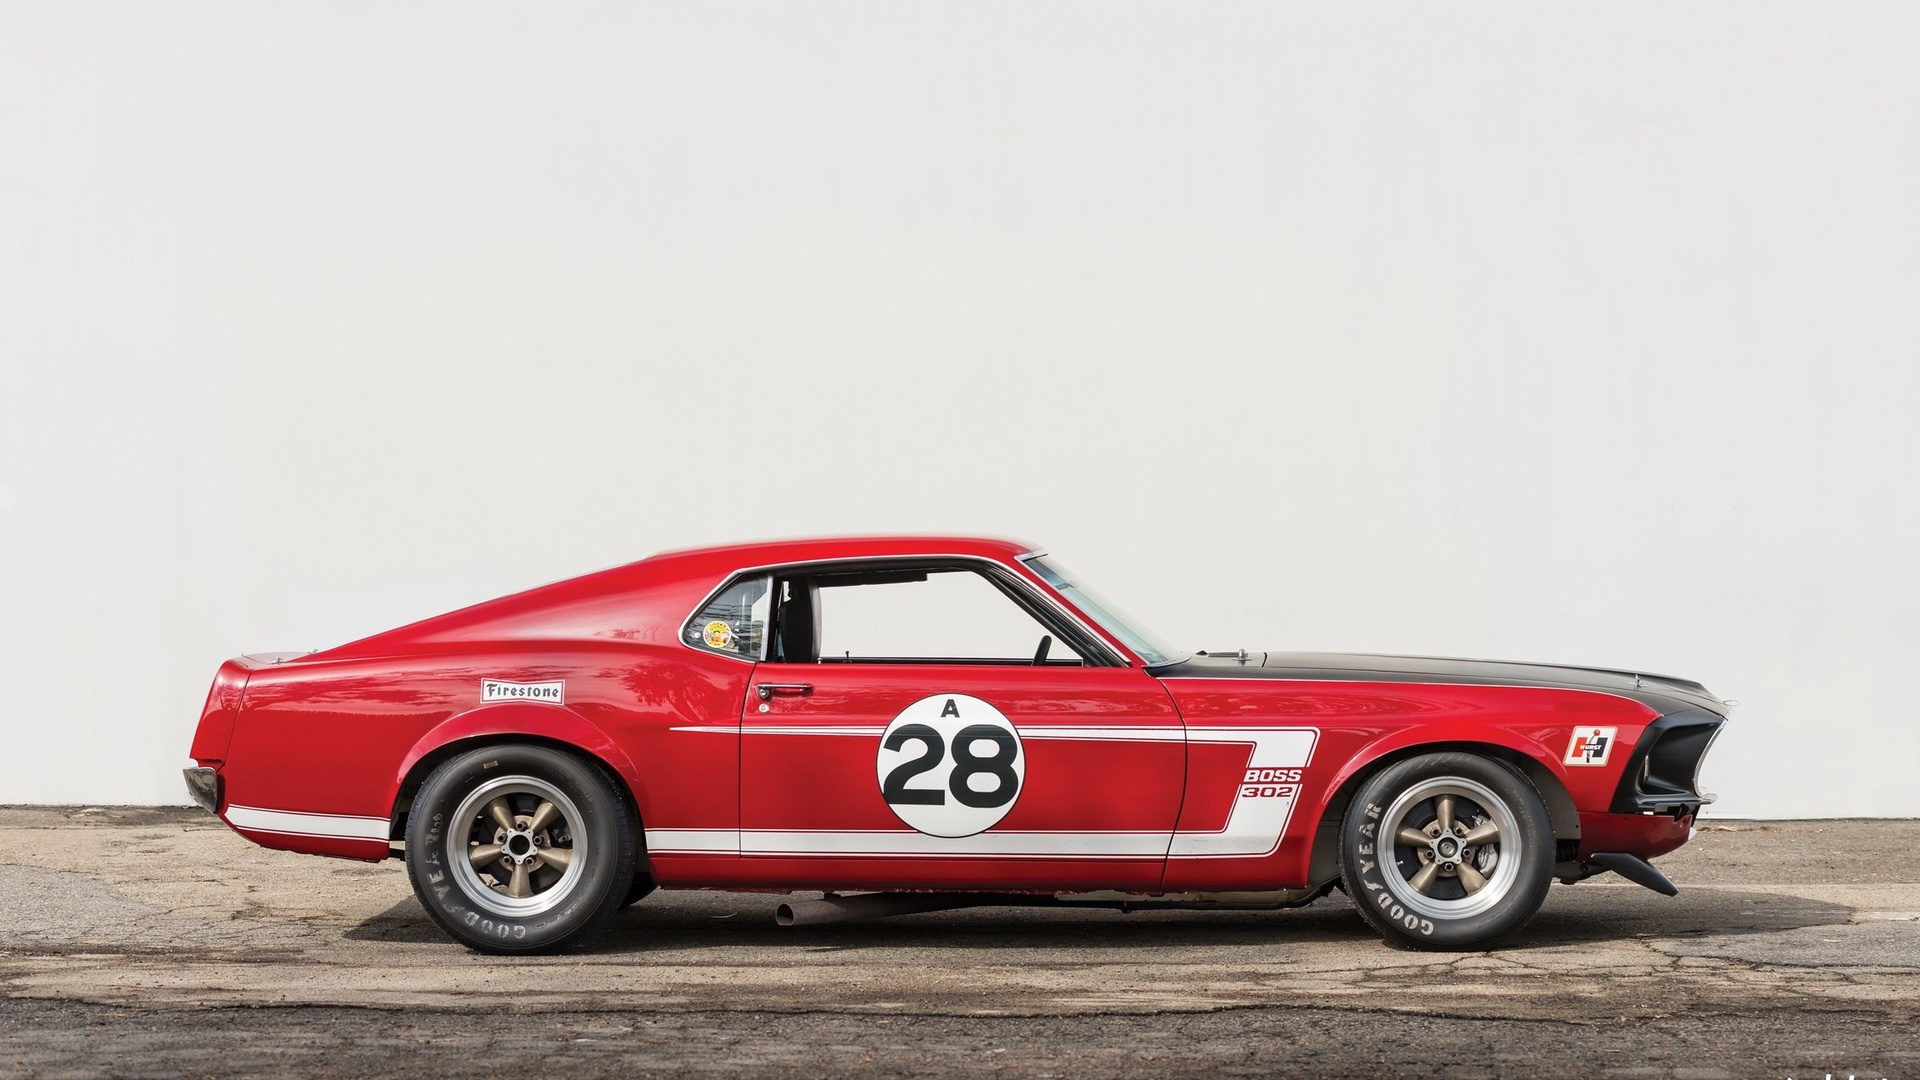 ford, ford mustang boss 302, ford mustang, muscle cars, two tone, outdoors, car, vehicle